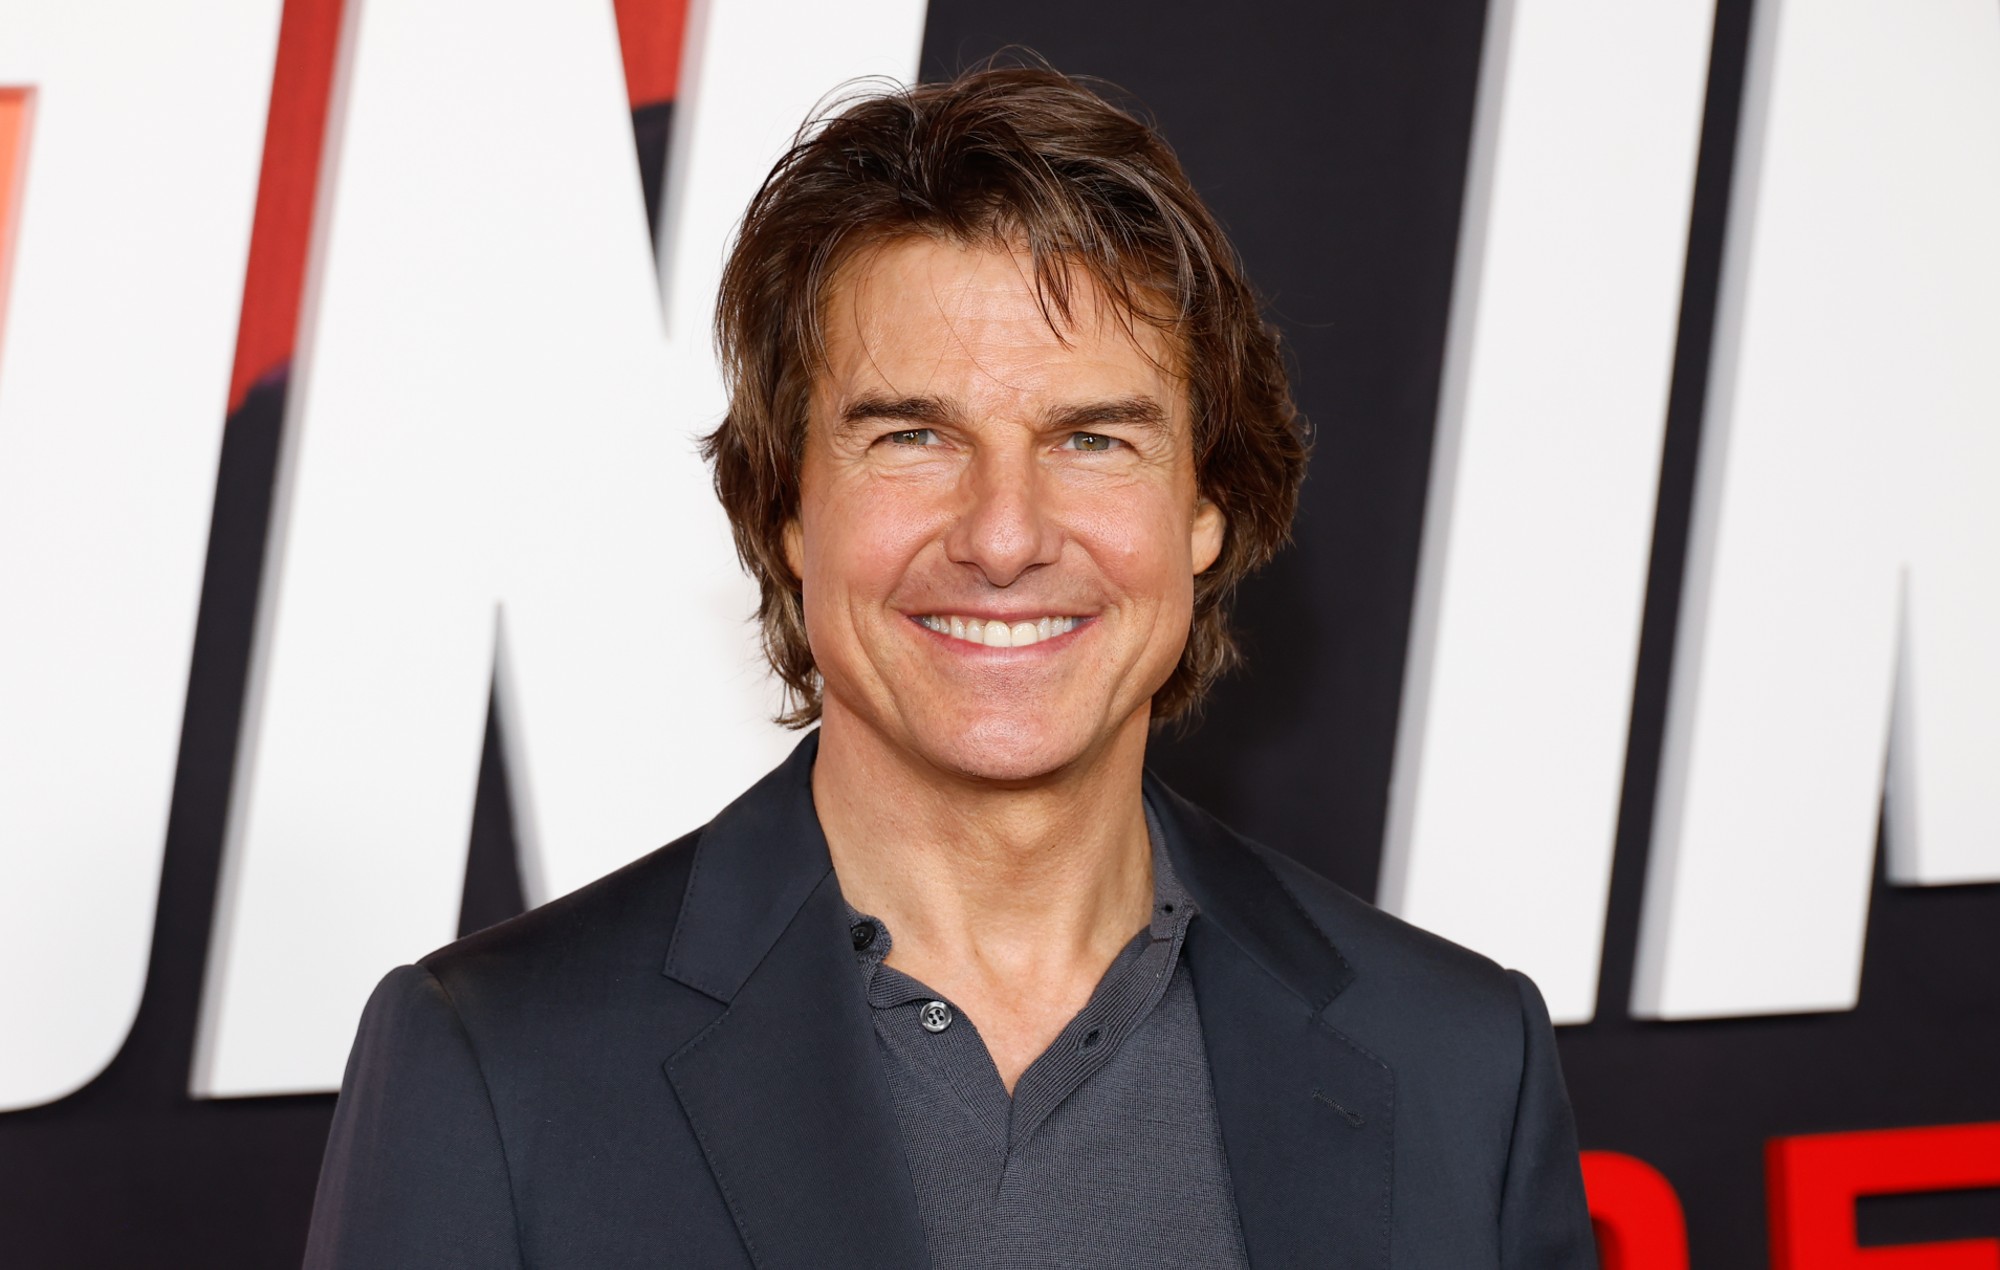 Tom Cruise is reportedly dating ex-wife of Russian oligarch